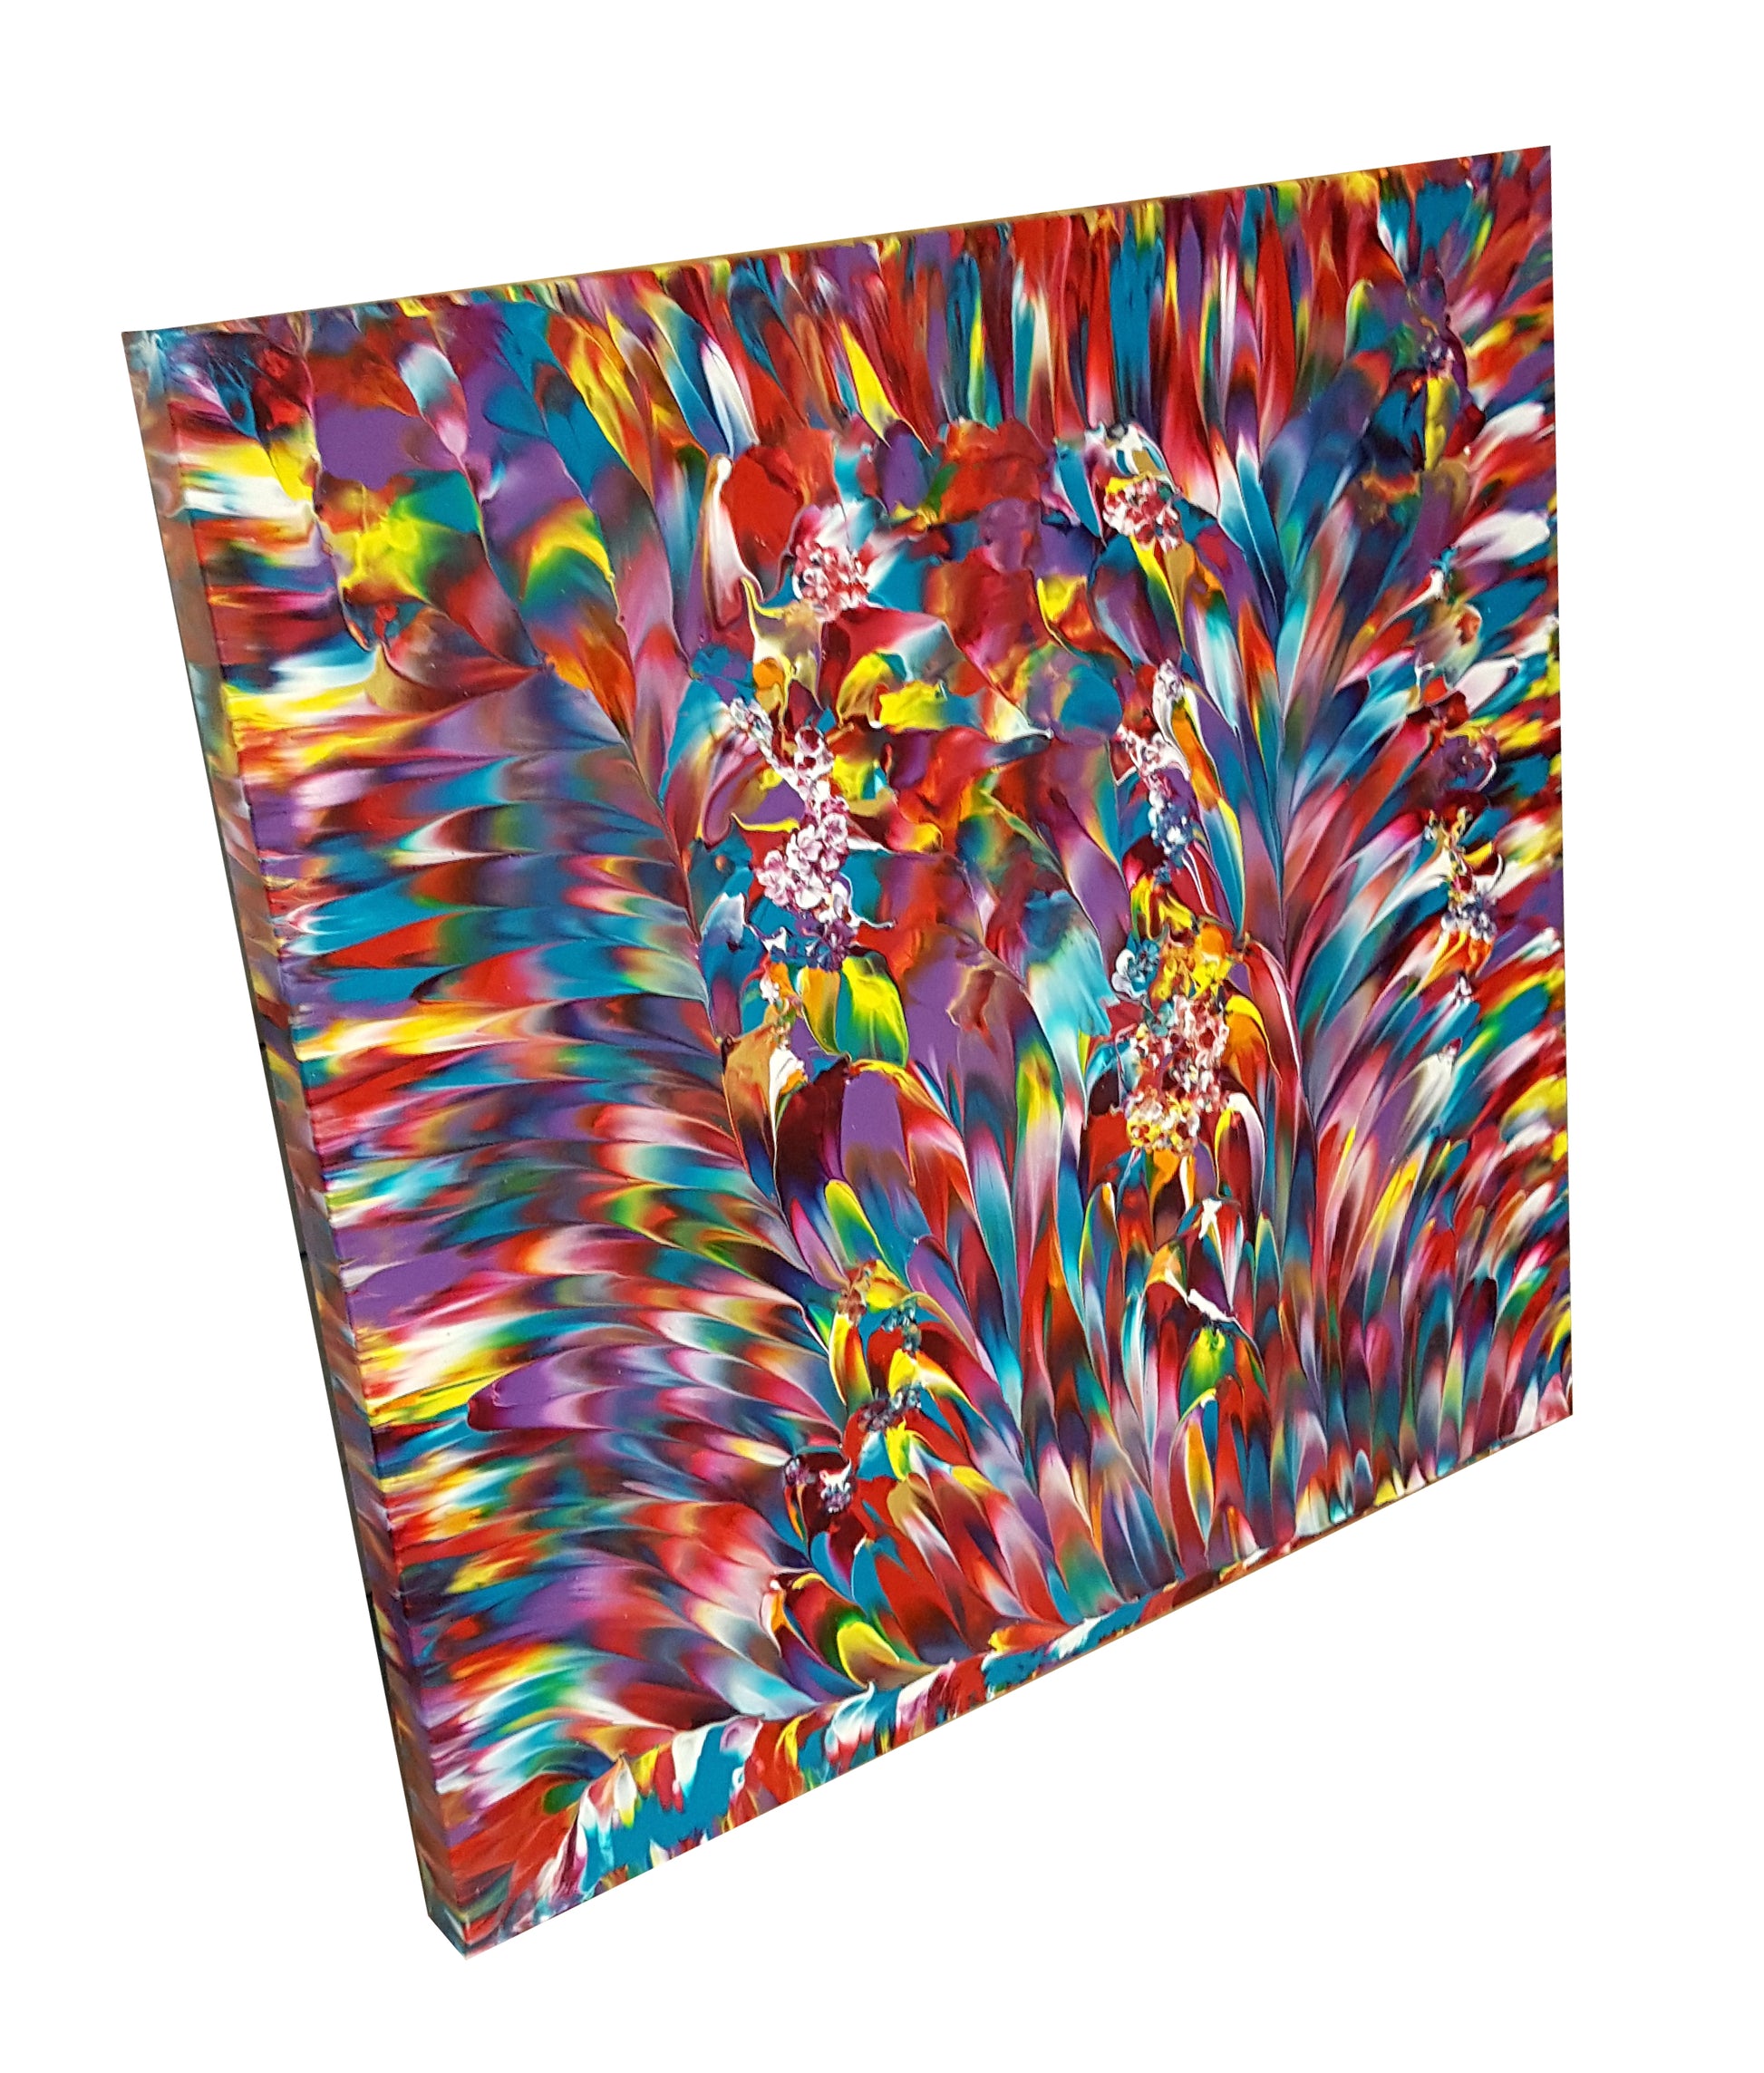 Joy-of-Life-Alexandra-Romano-Art-Unique-Bold-Abstracts-for-Sale-Online-Buy-Contemporary-Wall-Art-Decor-Colourful-Artwork